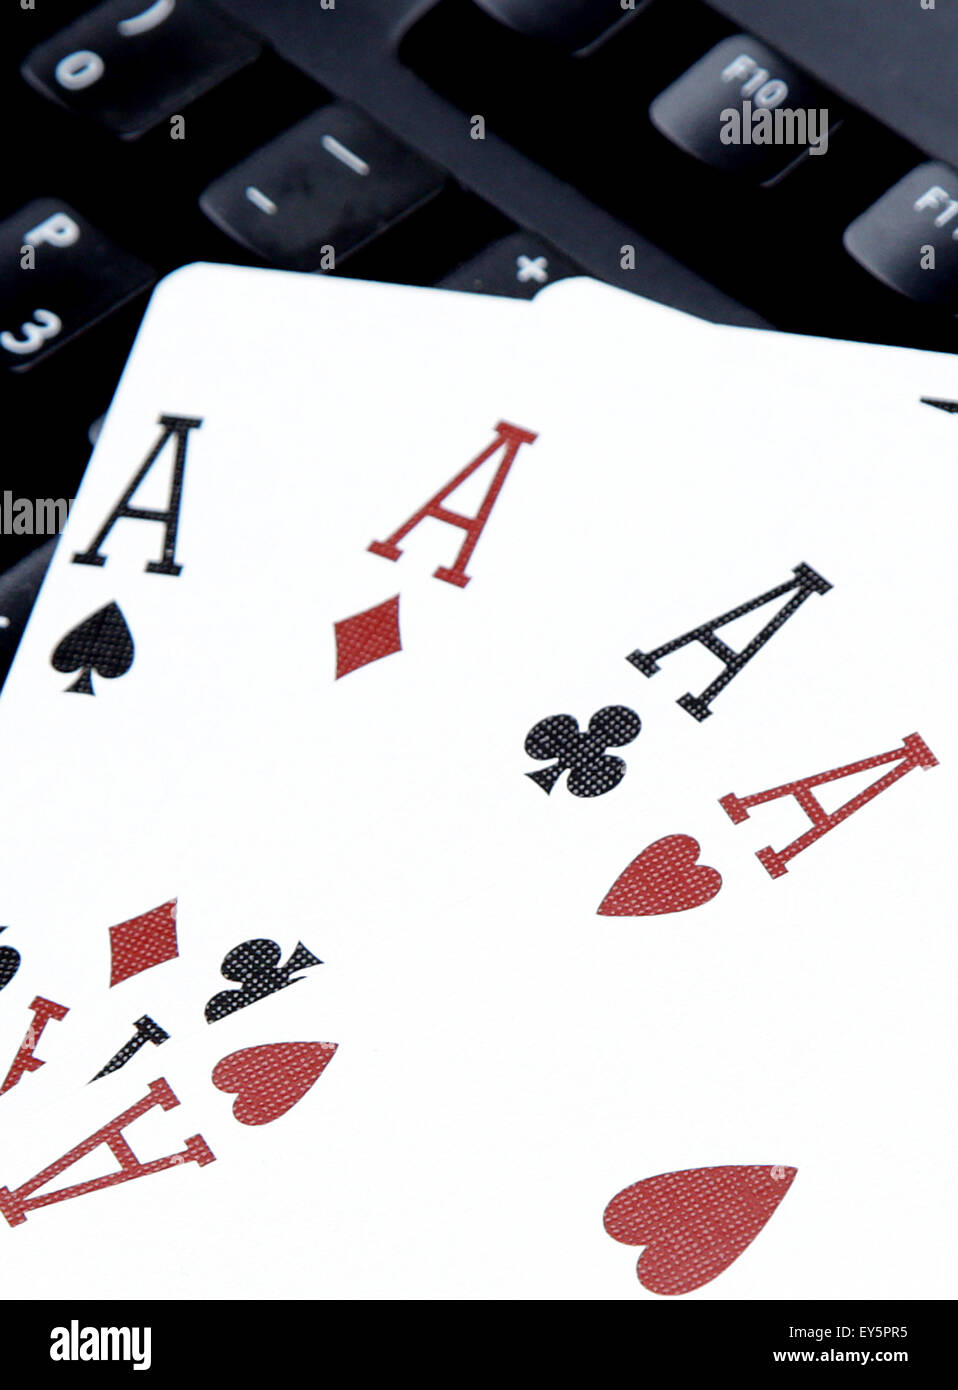 internet casino poker four of kind aces cards comdination hearts on keyboard Stock Photo